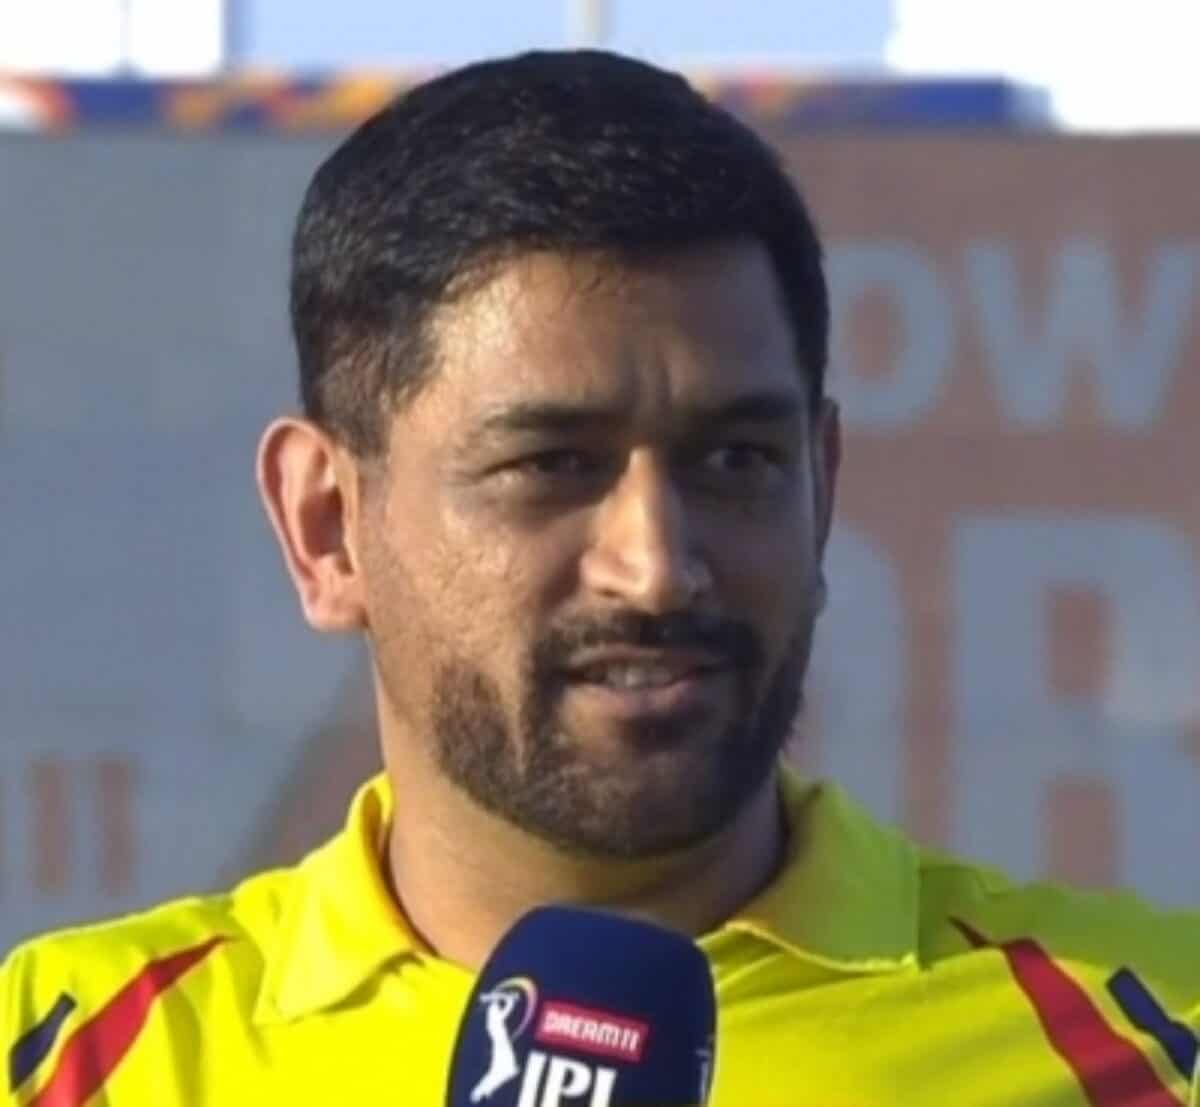 New Look Dhoni Returns To Competitive Cricket After 437 Days New ipl rules could see chennai super kings lose ms dhoni | zee news. competitive cricket after 437 days